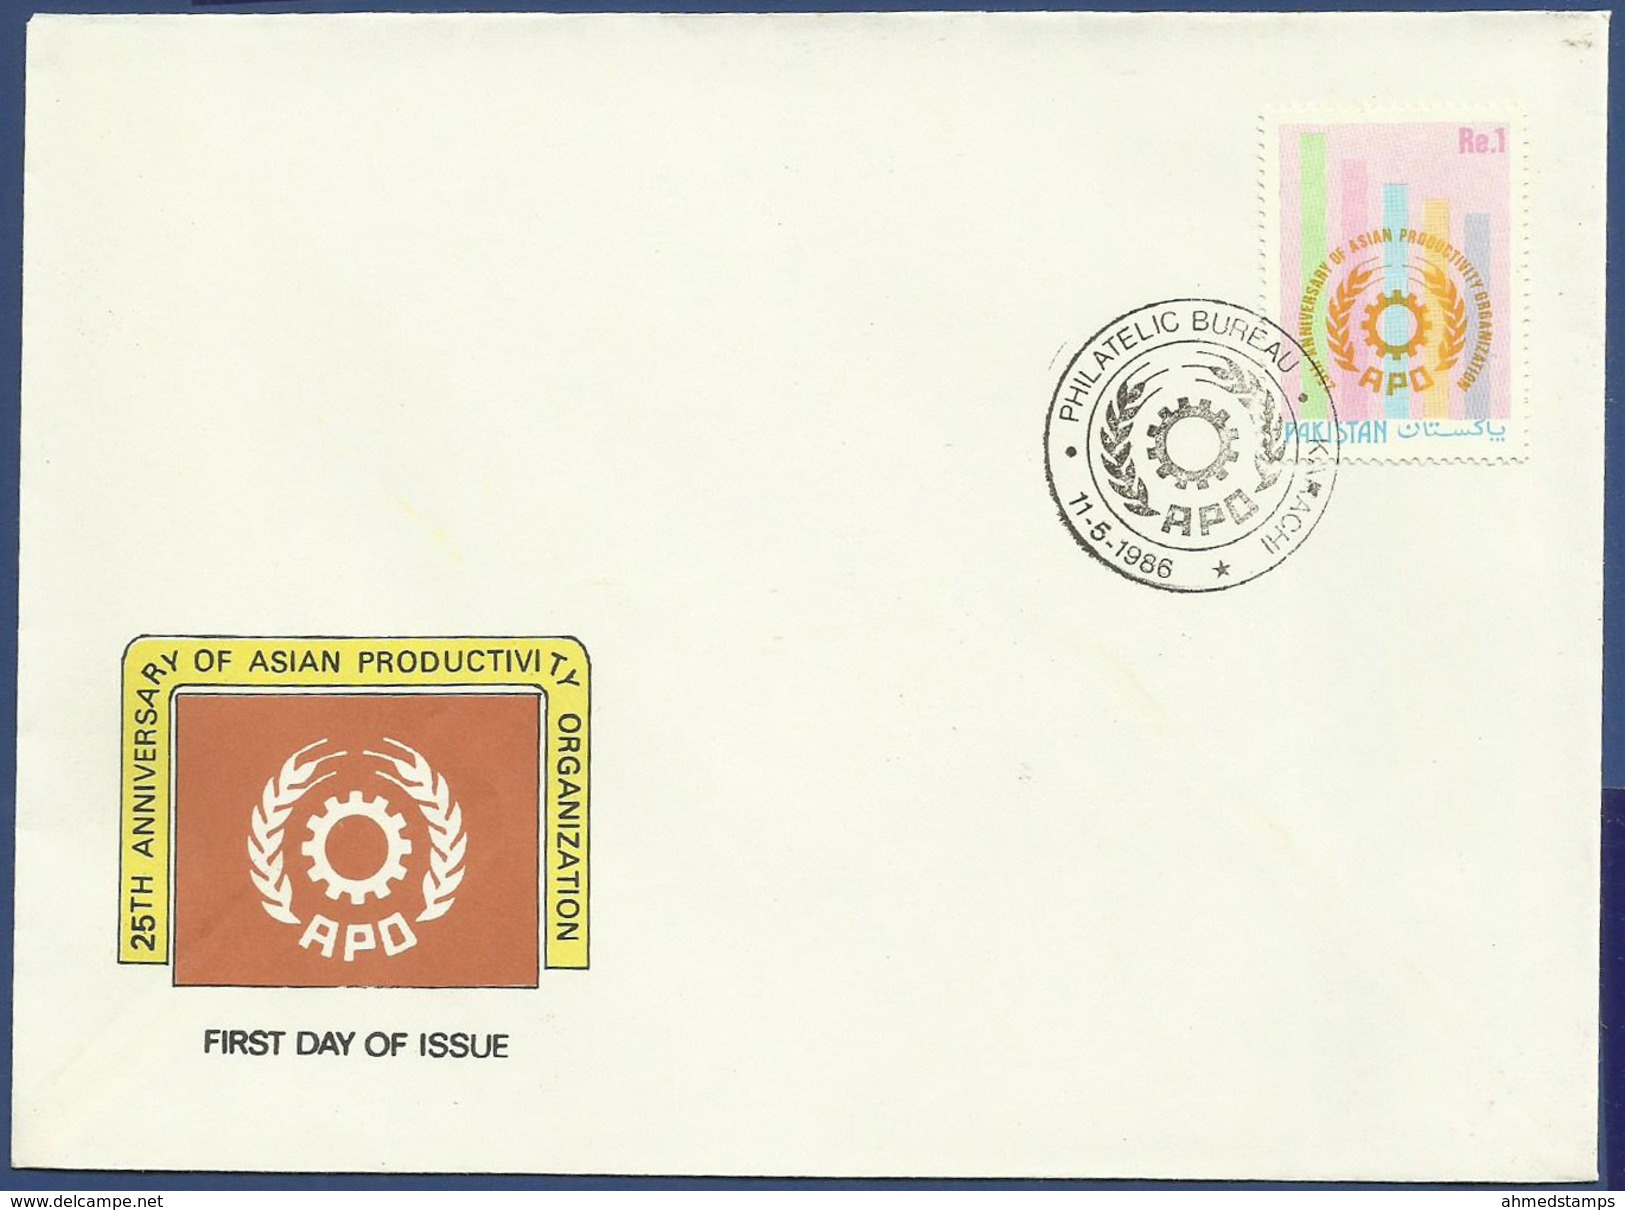 PAKISTAN 1986 MNH FDC FIRST DAY COVER 25TH ANNIVERSARY OF ASIAN PRODUCTIVITY ORGANIZATION, APO, AGRICULTURE - Pakistan